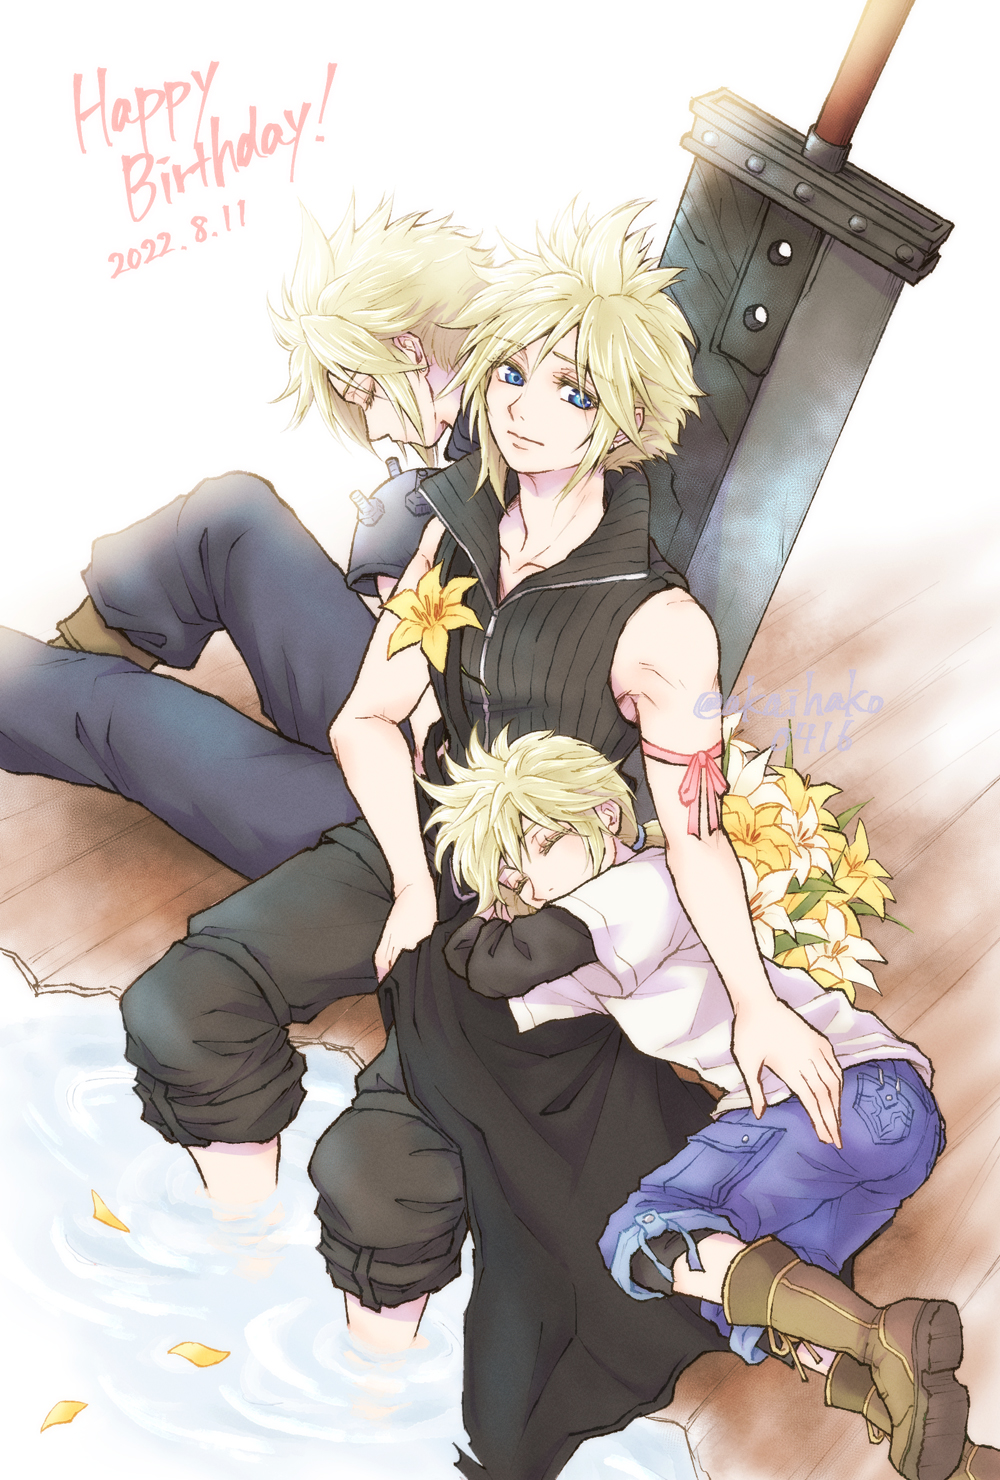 3boys arm_ribbon black_pants black_shirt blonde_hair blue_eyes blue_shorts boots brown_footwear buster_sword closed_eyes dated earrings final_fantasy final_fantasy_vii final_fantasy_vii_advent_children final_fantasy_vii_remake flower hair_between_eyes happy_birthday head_down high_collar highres jewelry lap_pillow layered_shirt looking_at_viewer low_ponytail male_child male_focus medium_hair multiple_boys multiple_persona open_collar pants pants_rolled_up pink_ribbon planted planted_sword ribbon shirt short_hair shorts single_earring sitting sleeveless sleeveless_shirt soaking_feet spiked_hair sword t-shirt thigh_strap waist_cape weapon white_flower white_shirt wooden_floor yellow_flower you_(blacknwhite) younger